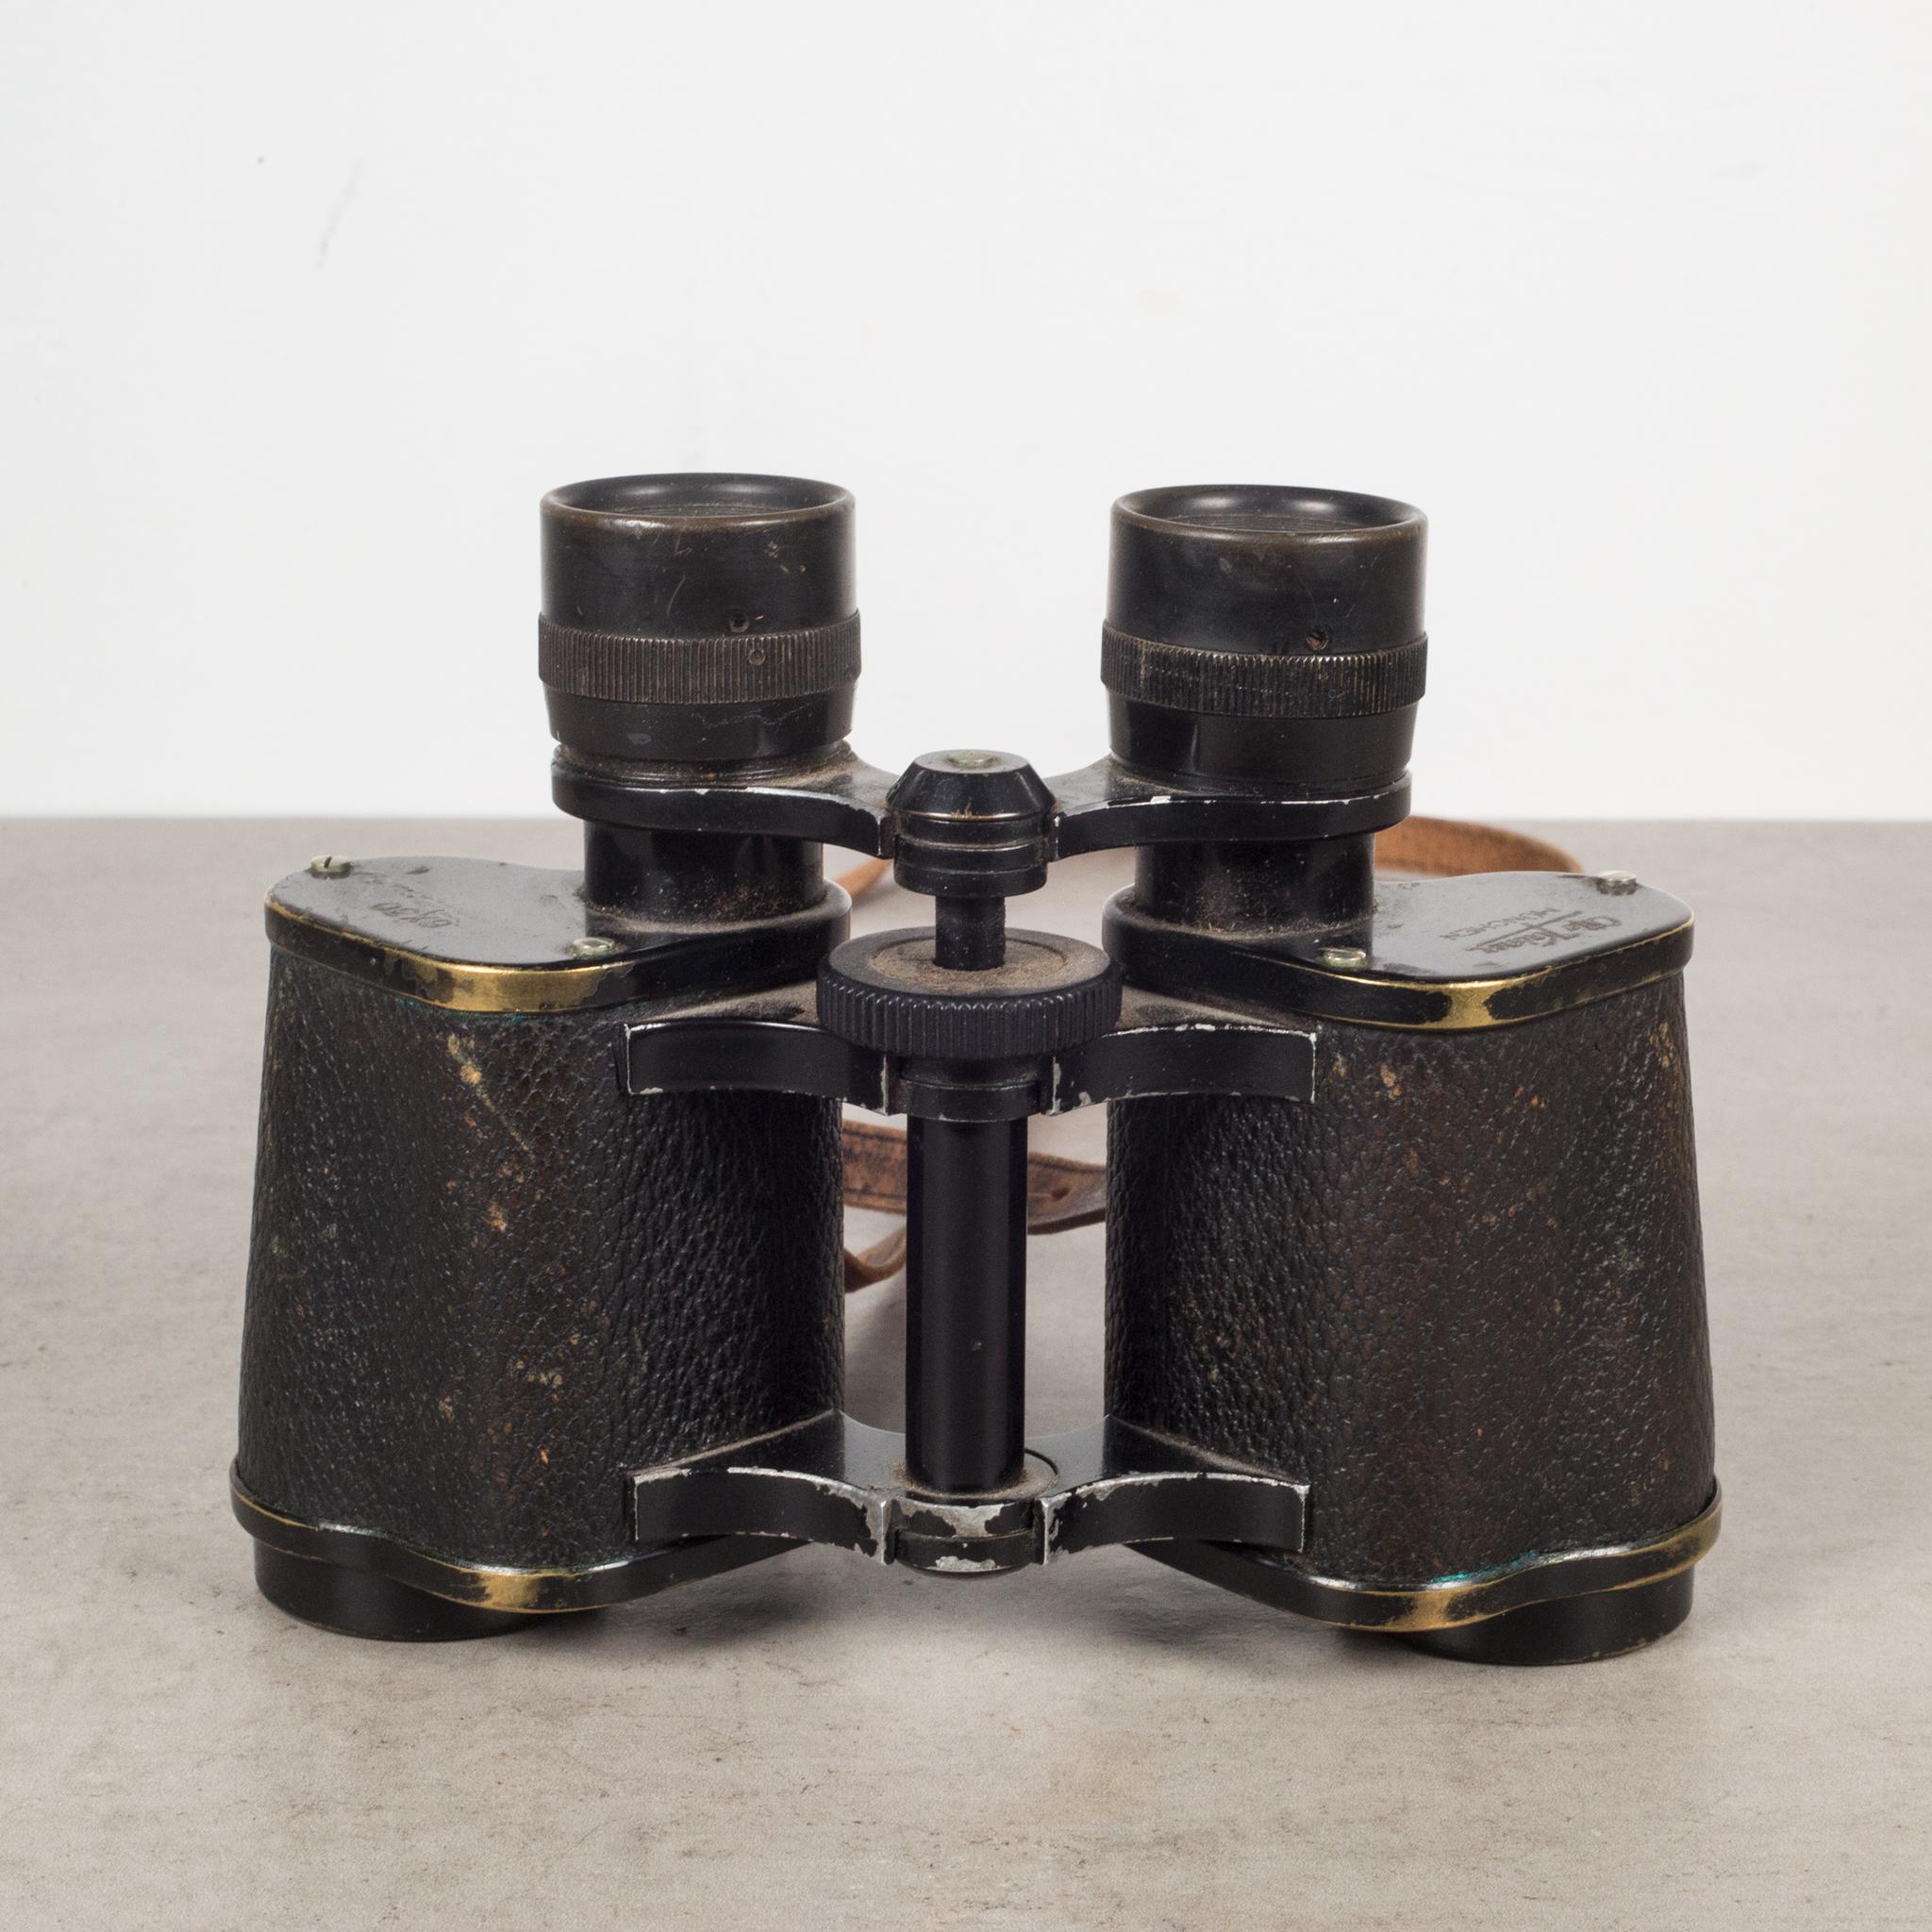 About

World War ll era leather wrapped and brass German military binoculars with original leather strap. The objective lenses are 30mm in diameter and their optics are good. The frame is a metal with brass plate and the barrels are covered in